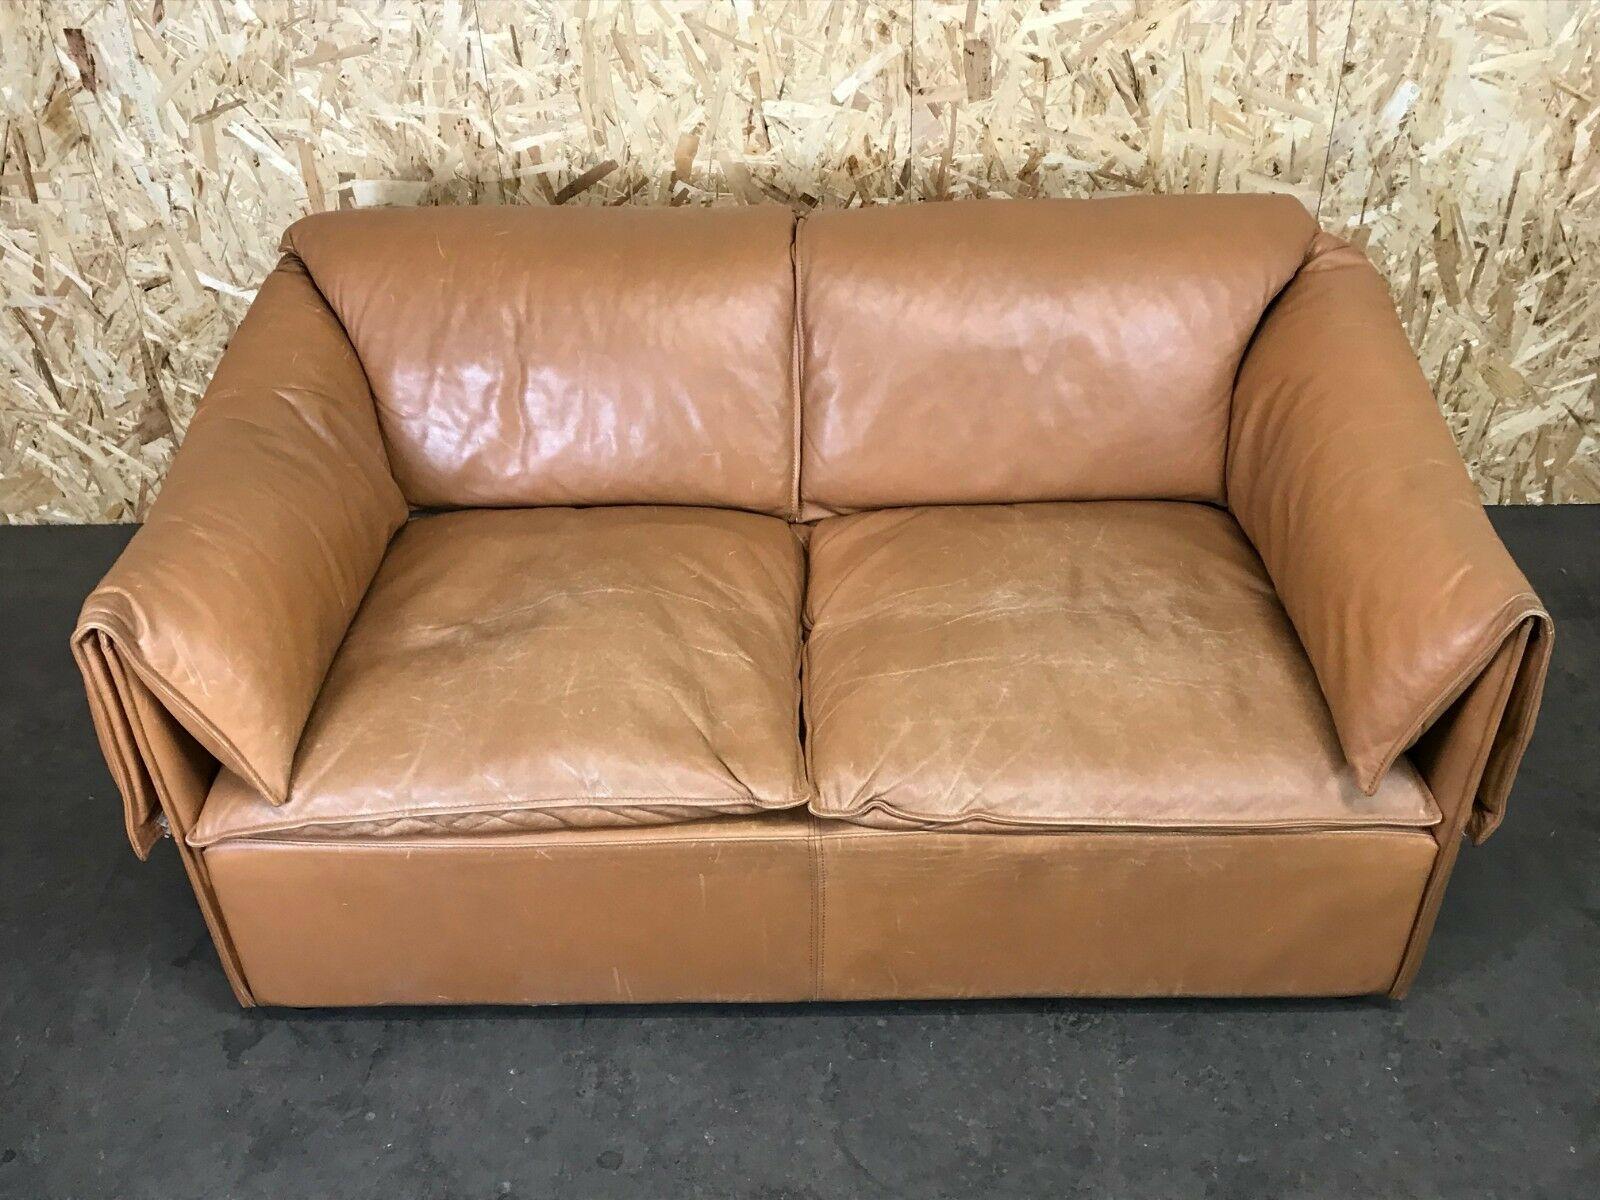 70s couch